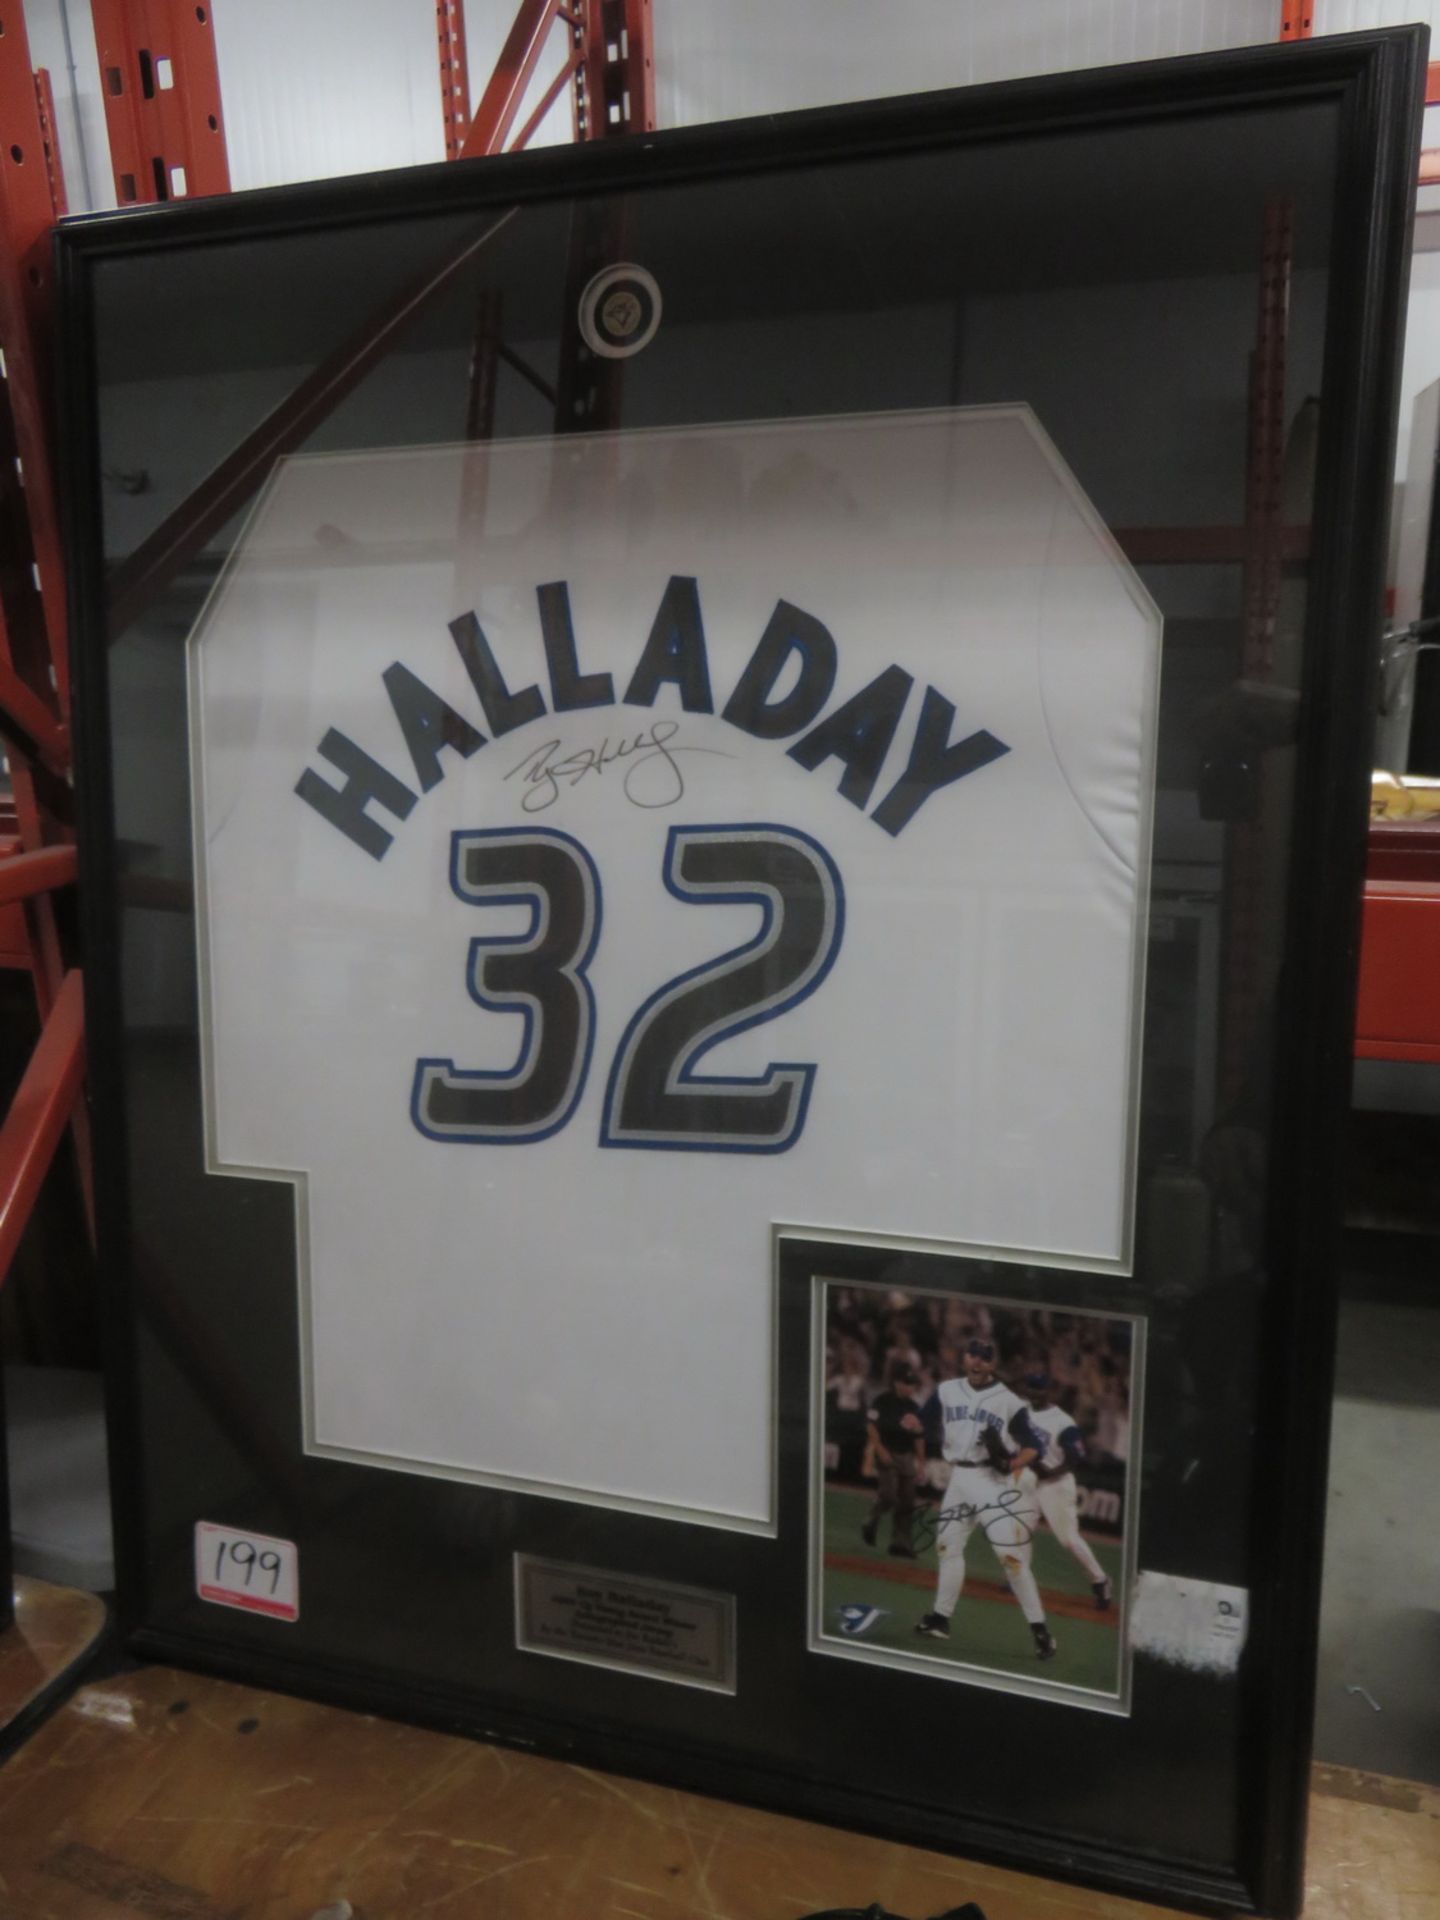 ROY HALLADAY 2003 CY YOUNG AWARD WINNER AUTOGRAPHED JERSEY & FRAMED SIGN